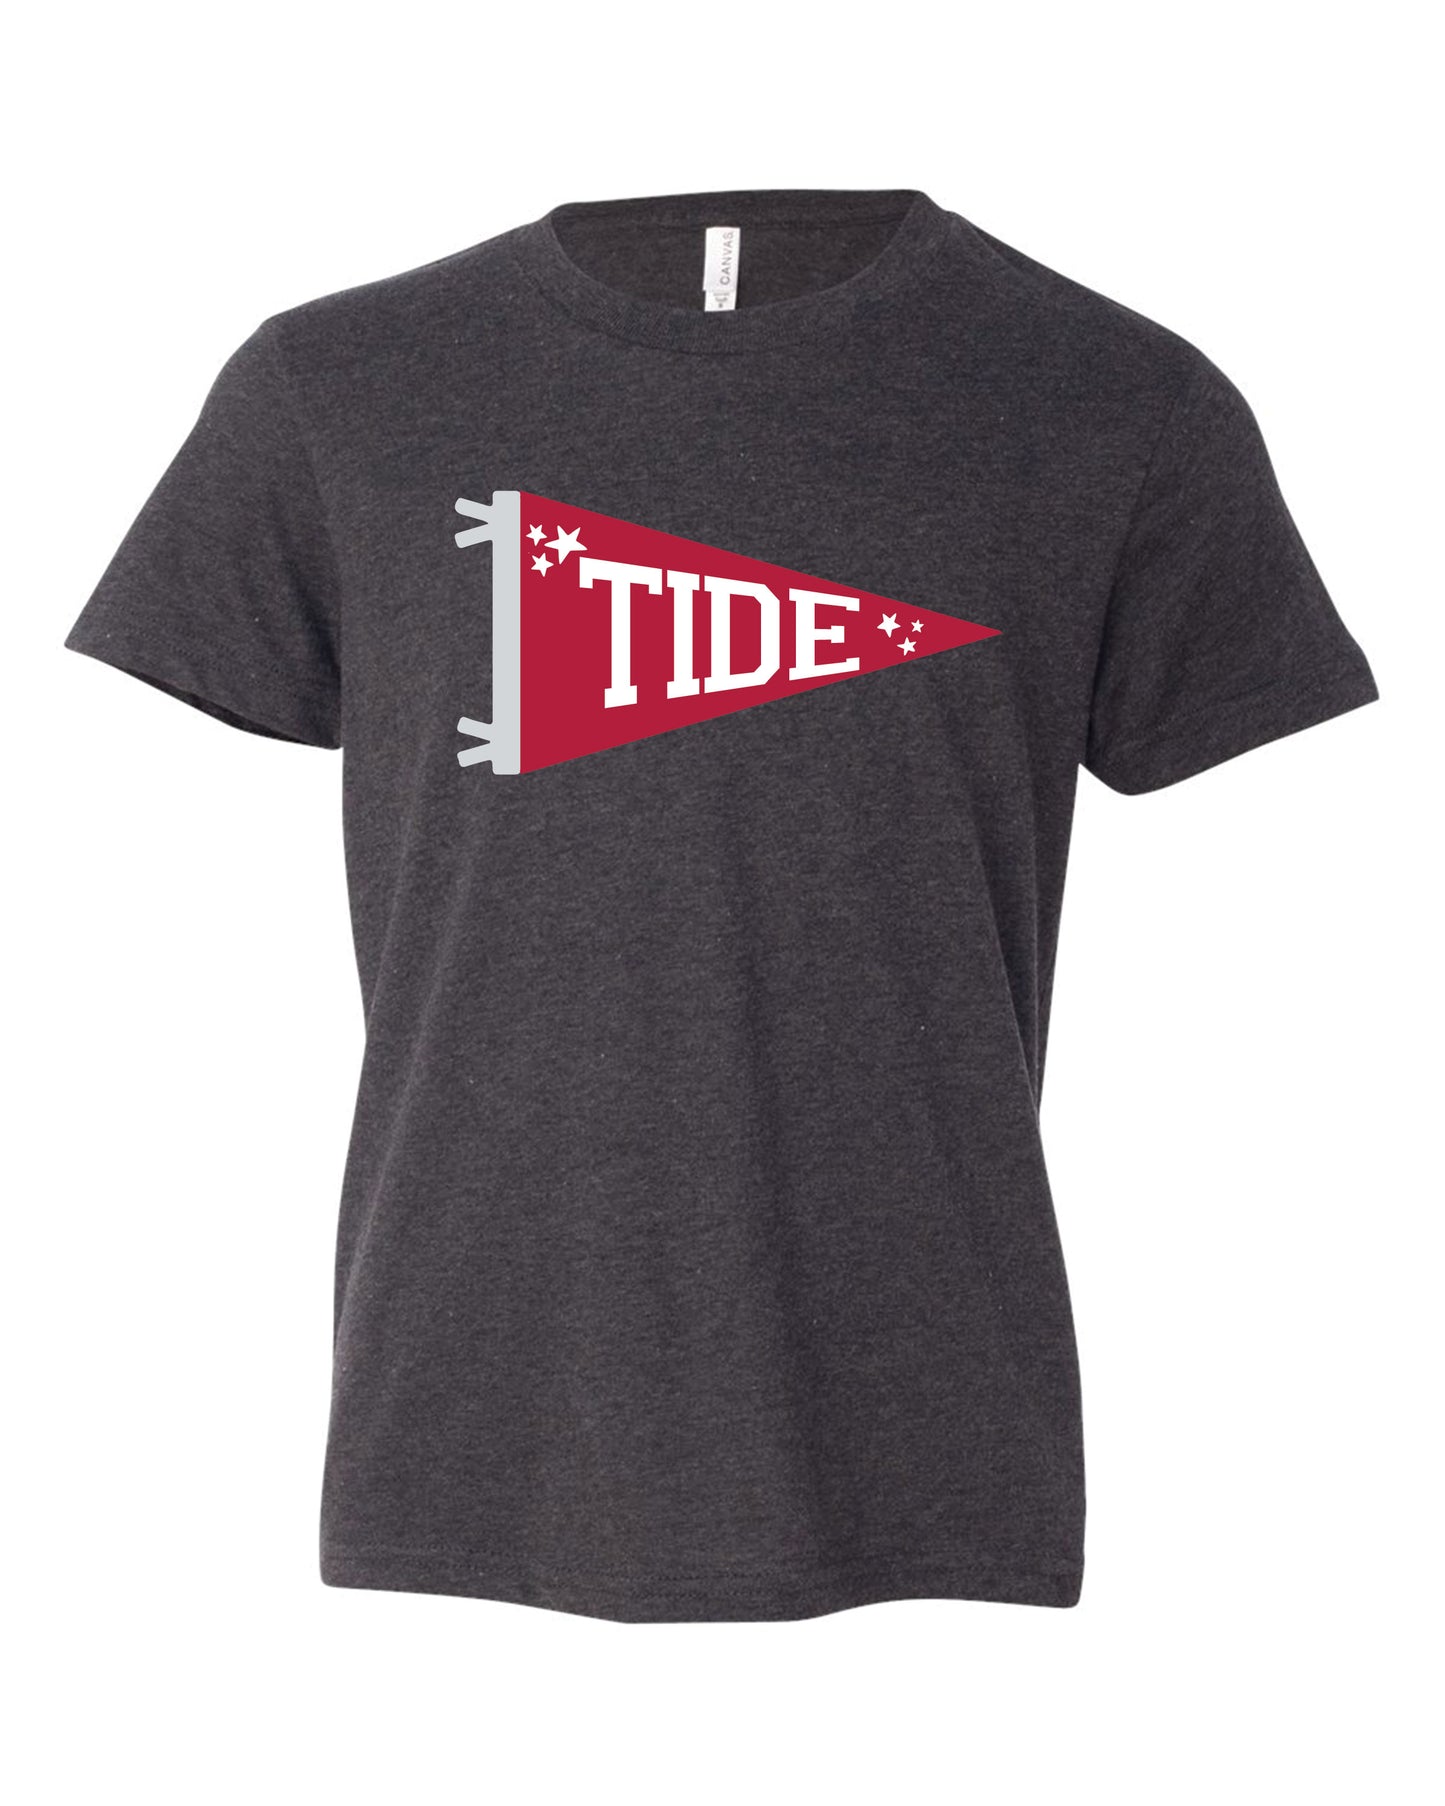 Tide Gameday Pennant | Kids Tee-Kids Tees-Sister Shirts-Sister Shirts, Cute & Custom Tees for Mama & Littles in Trussville, Alabama.